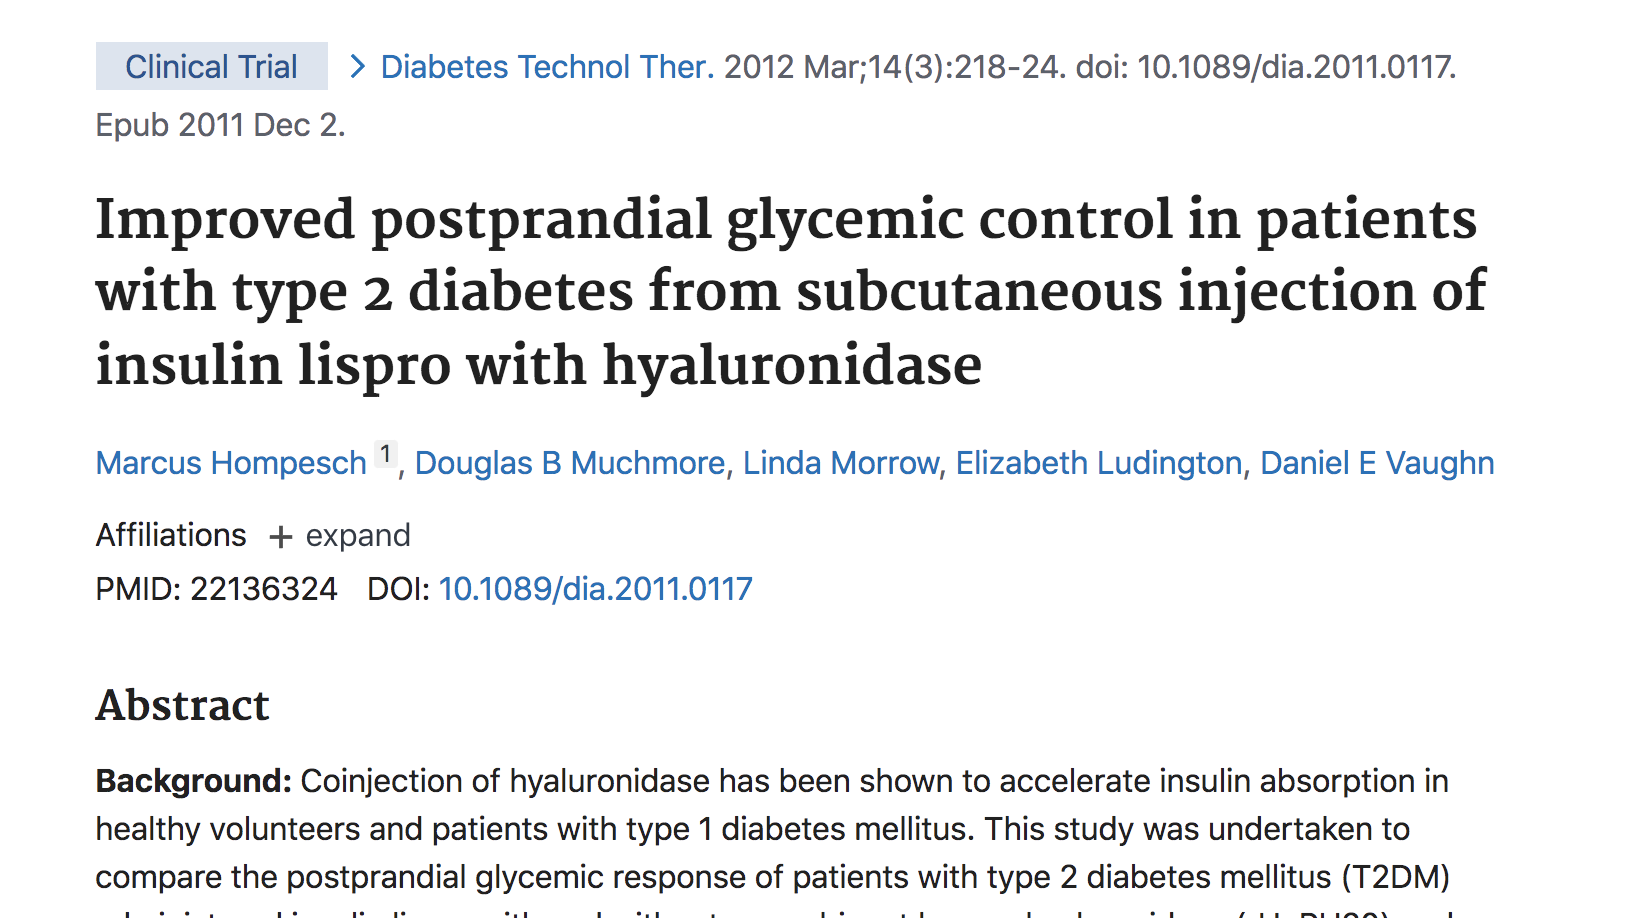 Improved postprandial glycemic control in patients with type 2 diabetes from subcutaneous injection of insulin lispro with hyaluronidase thumbnail